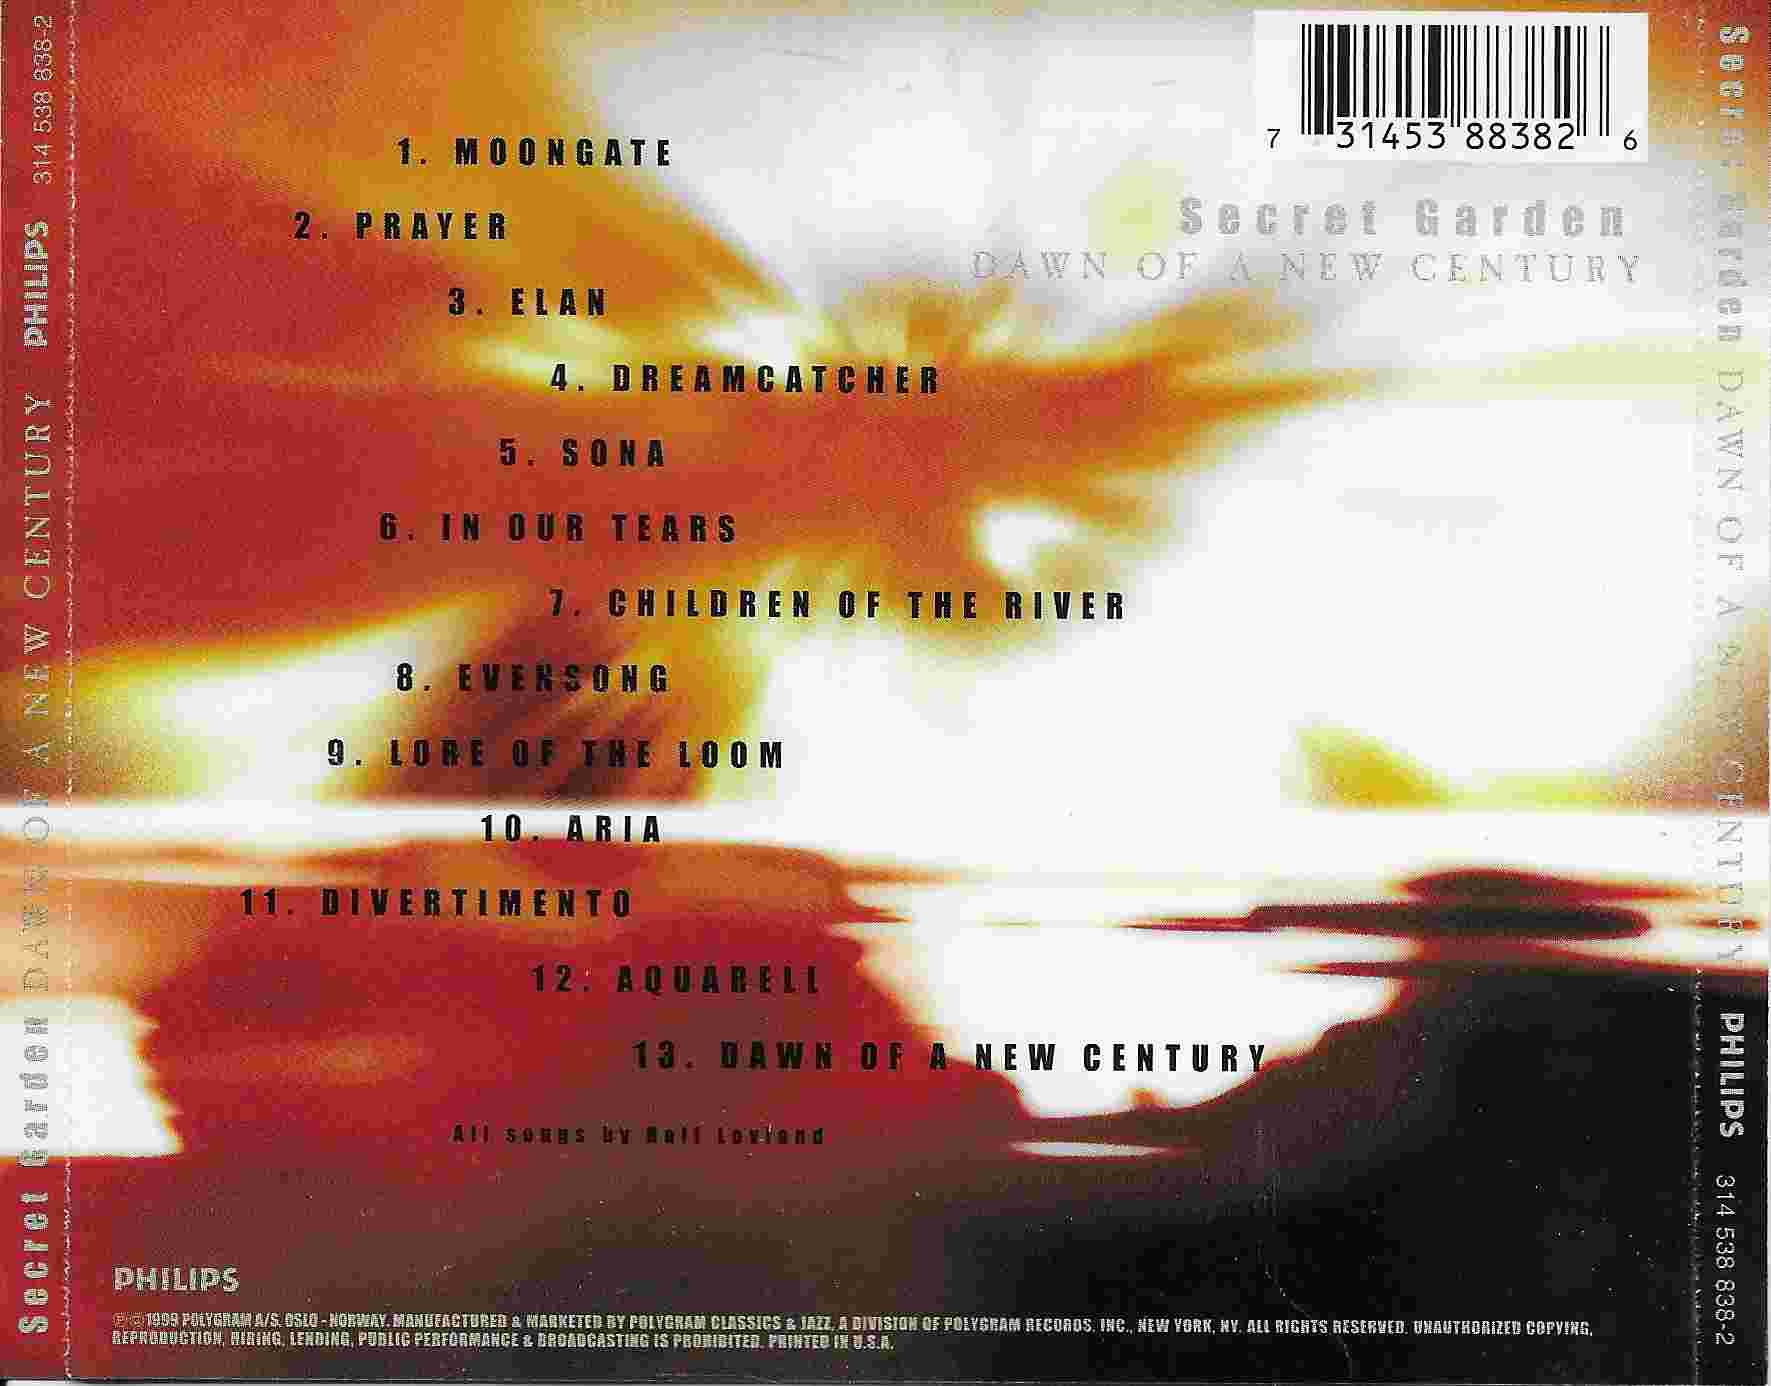 Back cover of 538838 - 2